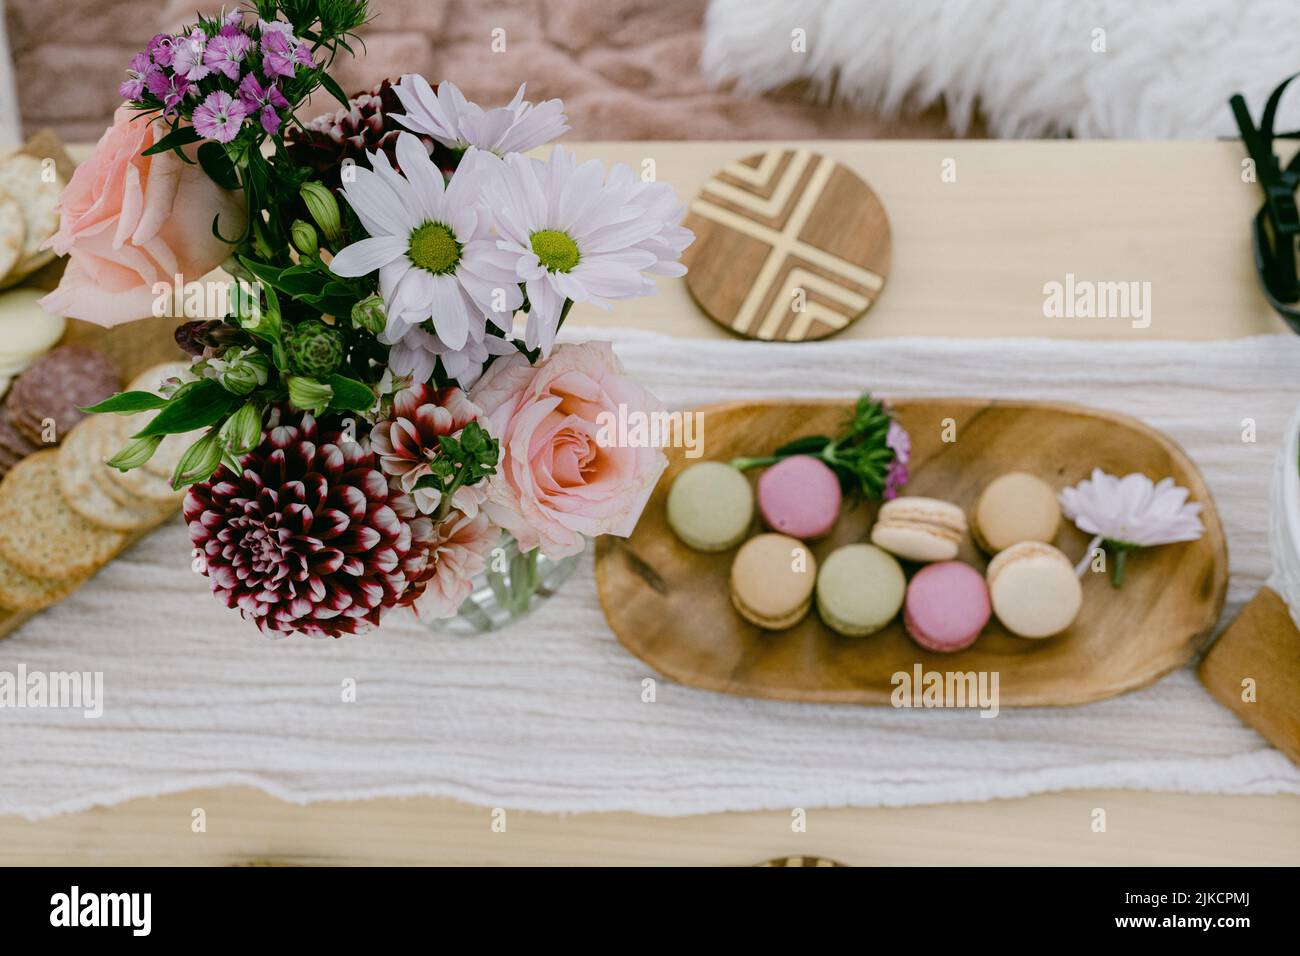 flowers and macarons on a wooden table Stock Photo